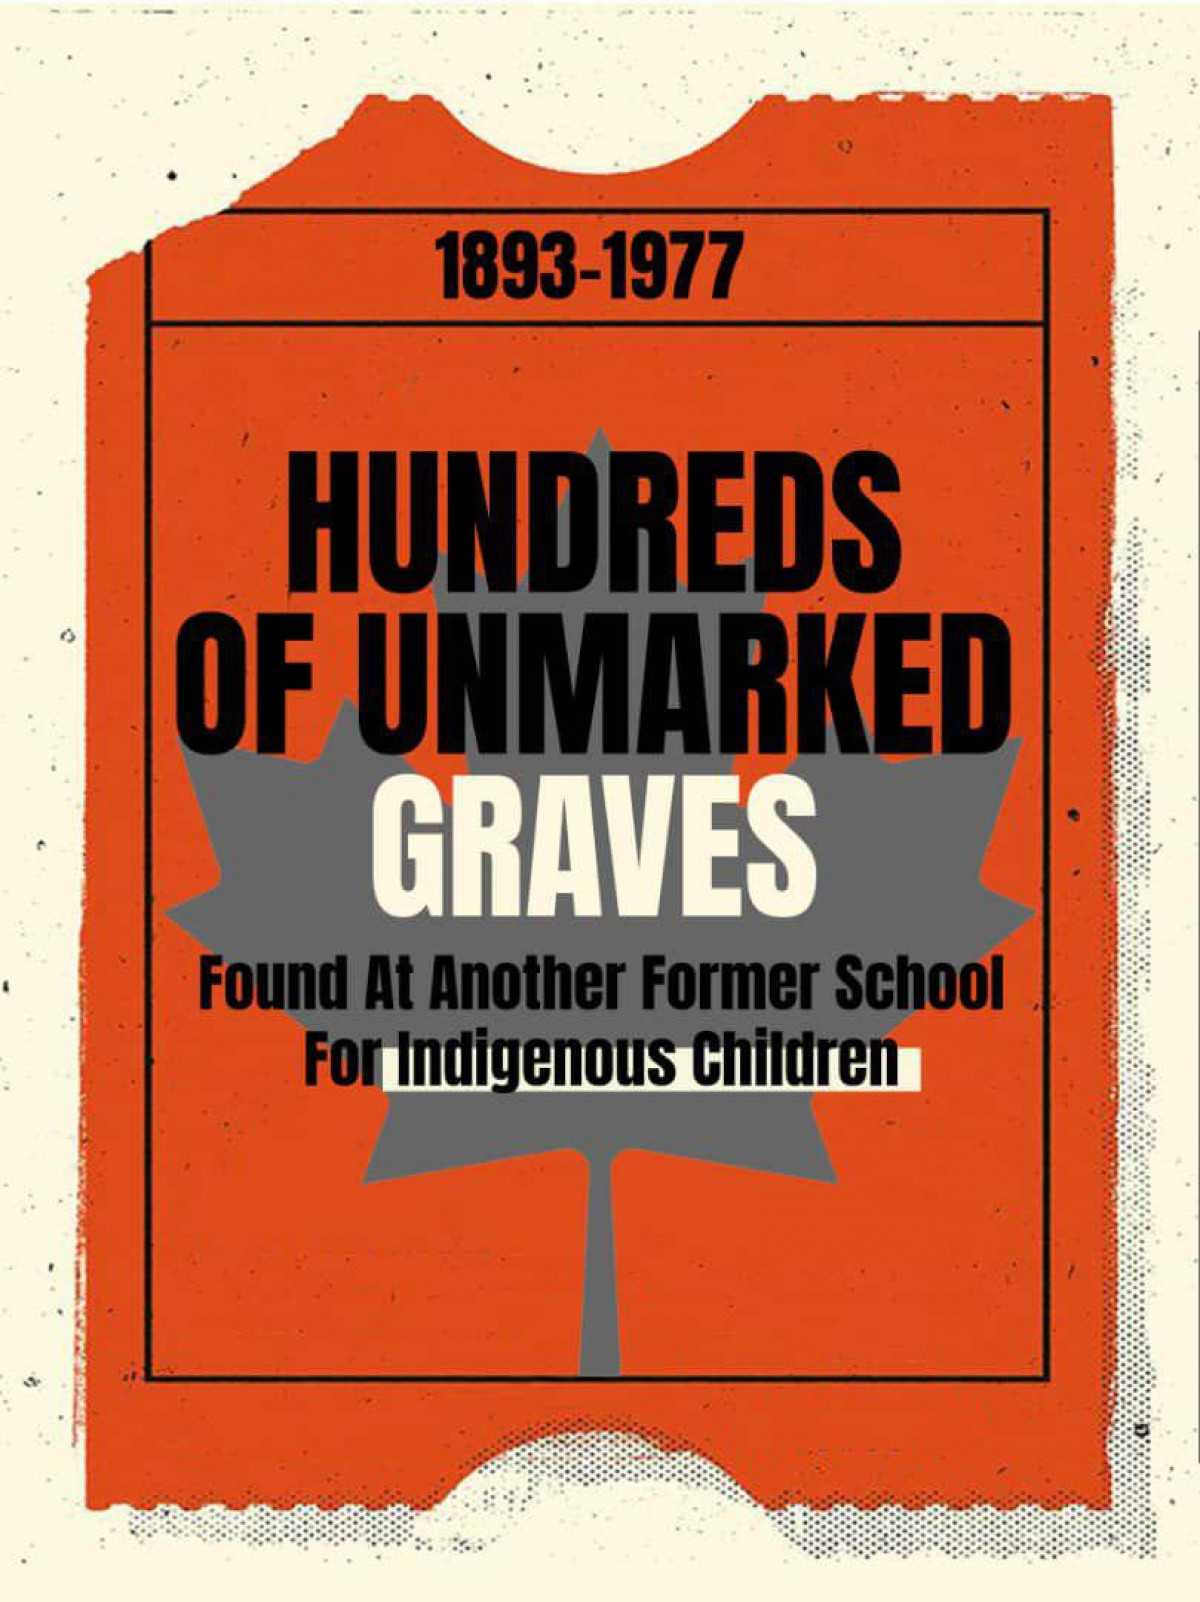 HUNDREDS OF UNMARKED GRAVES Found At Another Former School For Indigenous Children